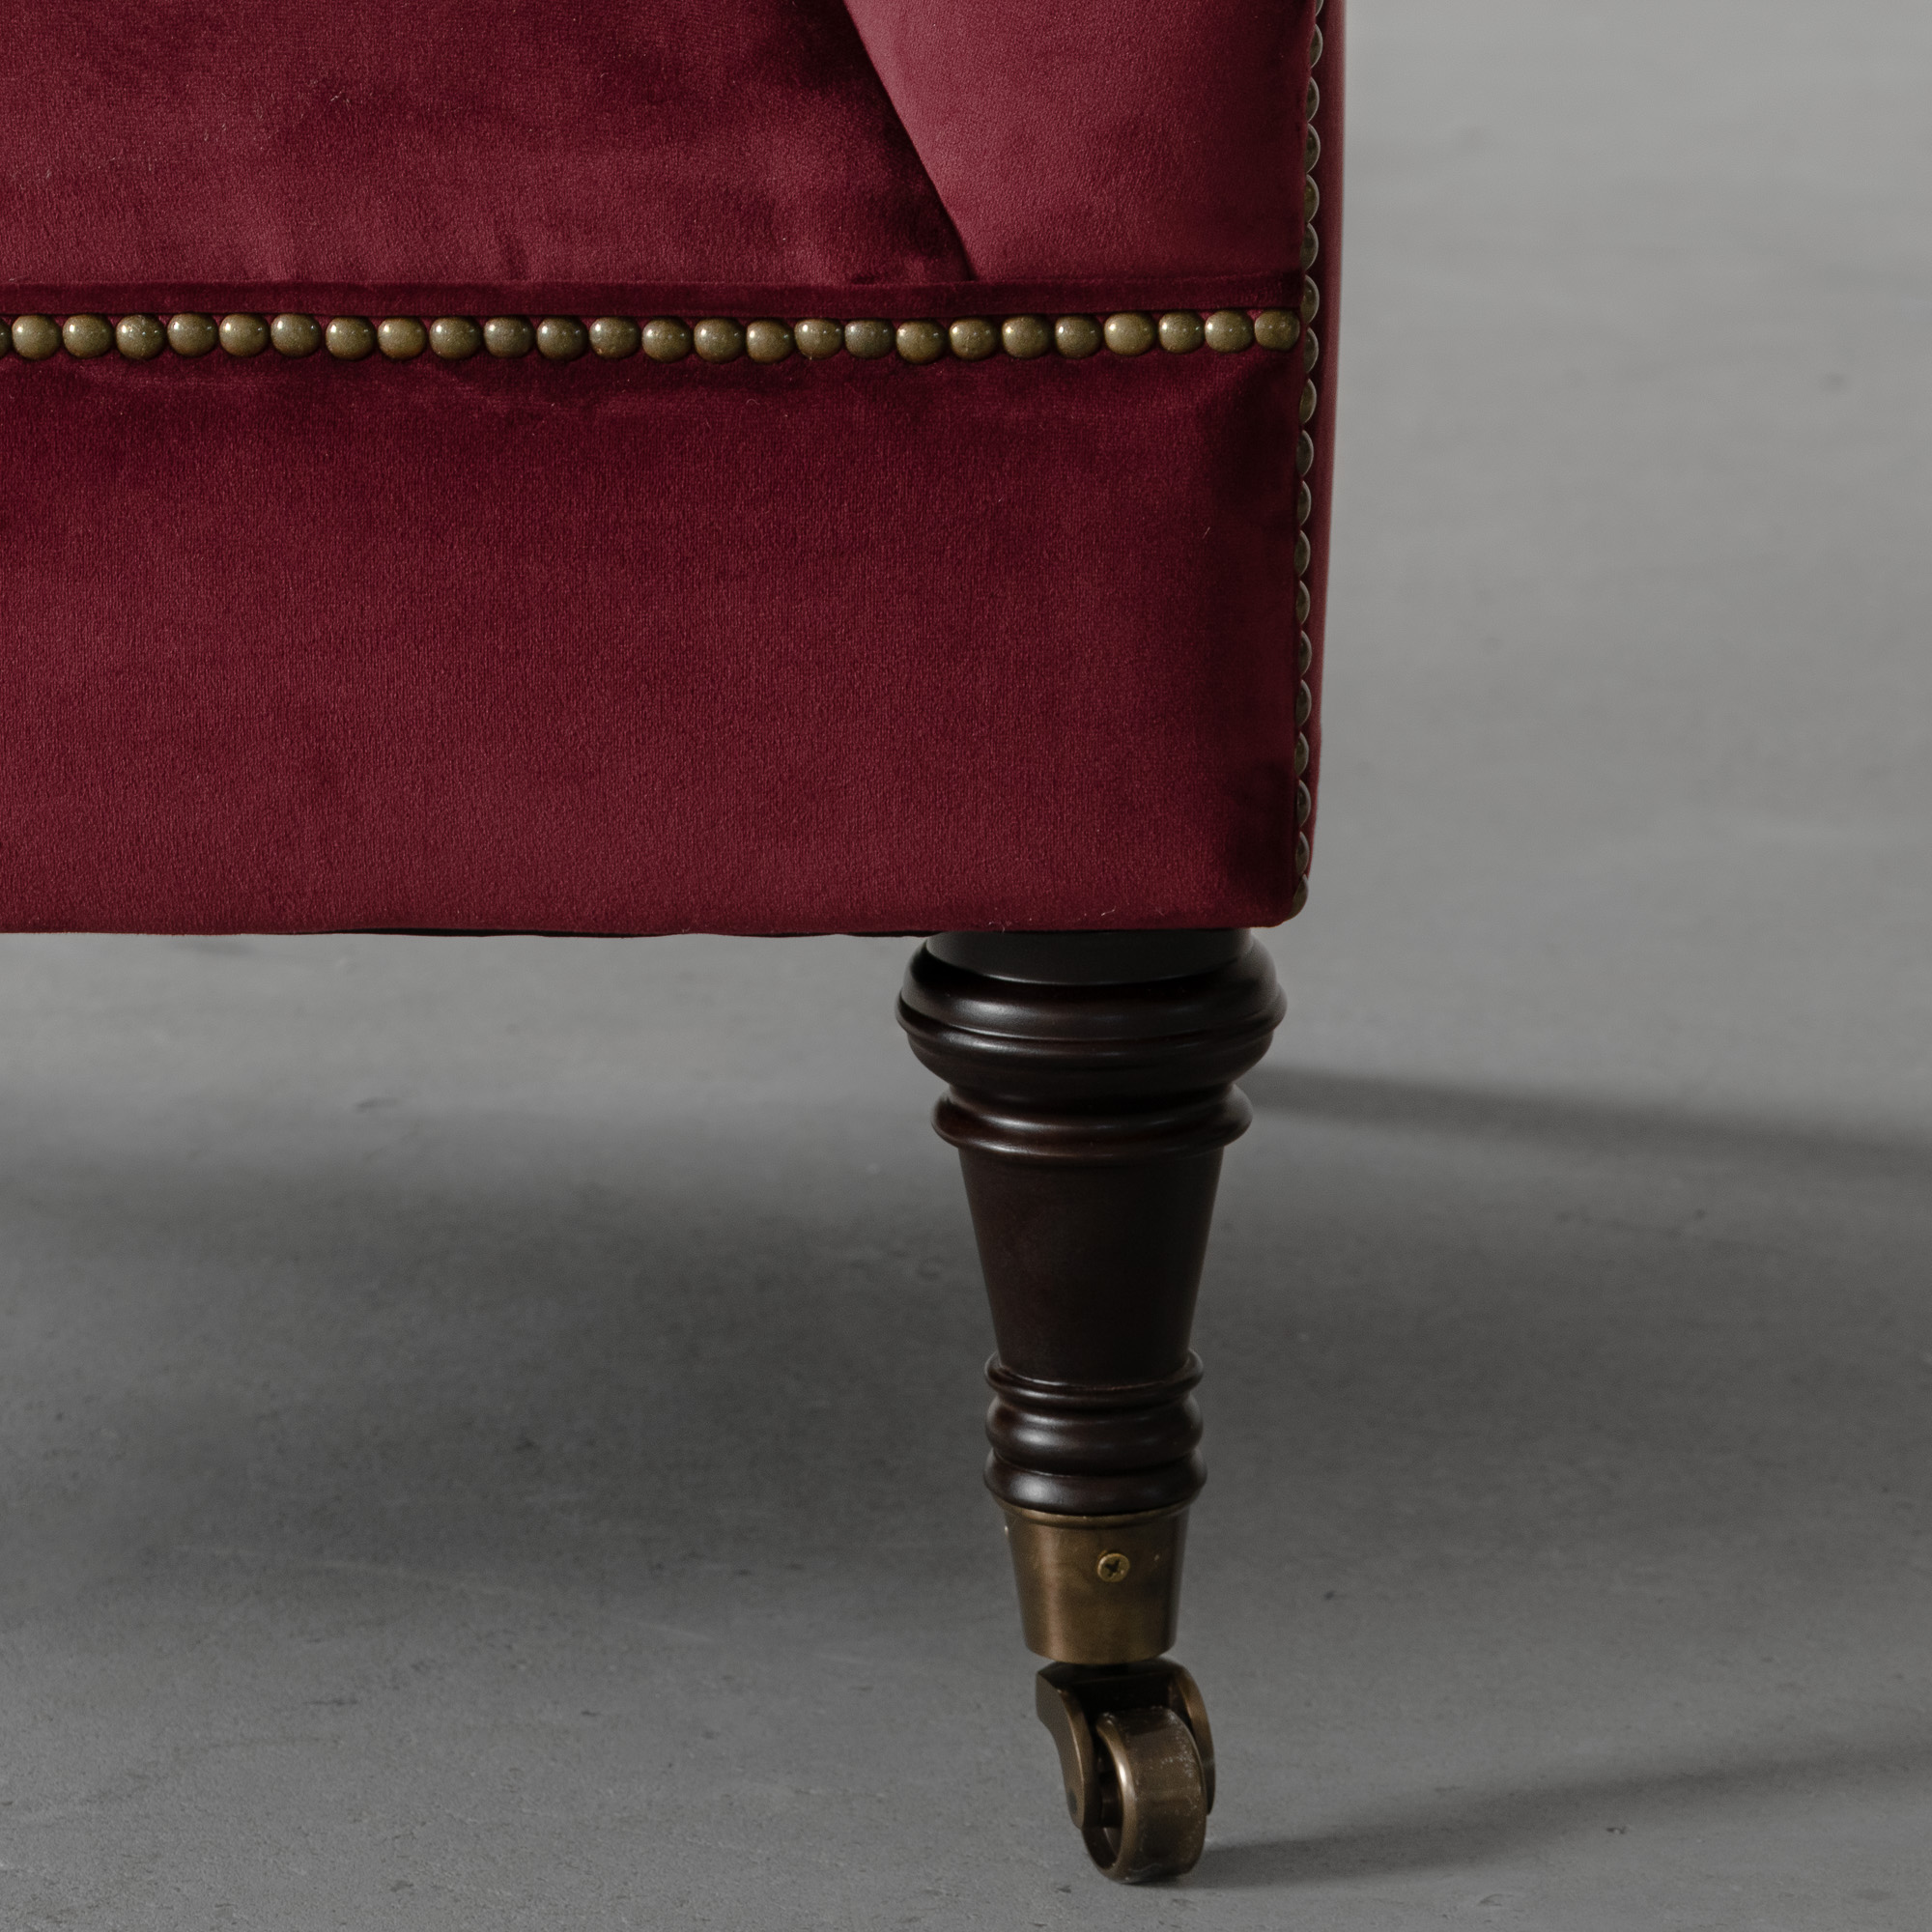 Wing Back Tufted Armchair